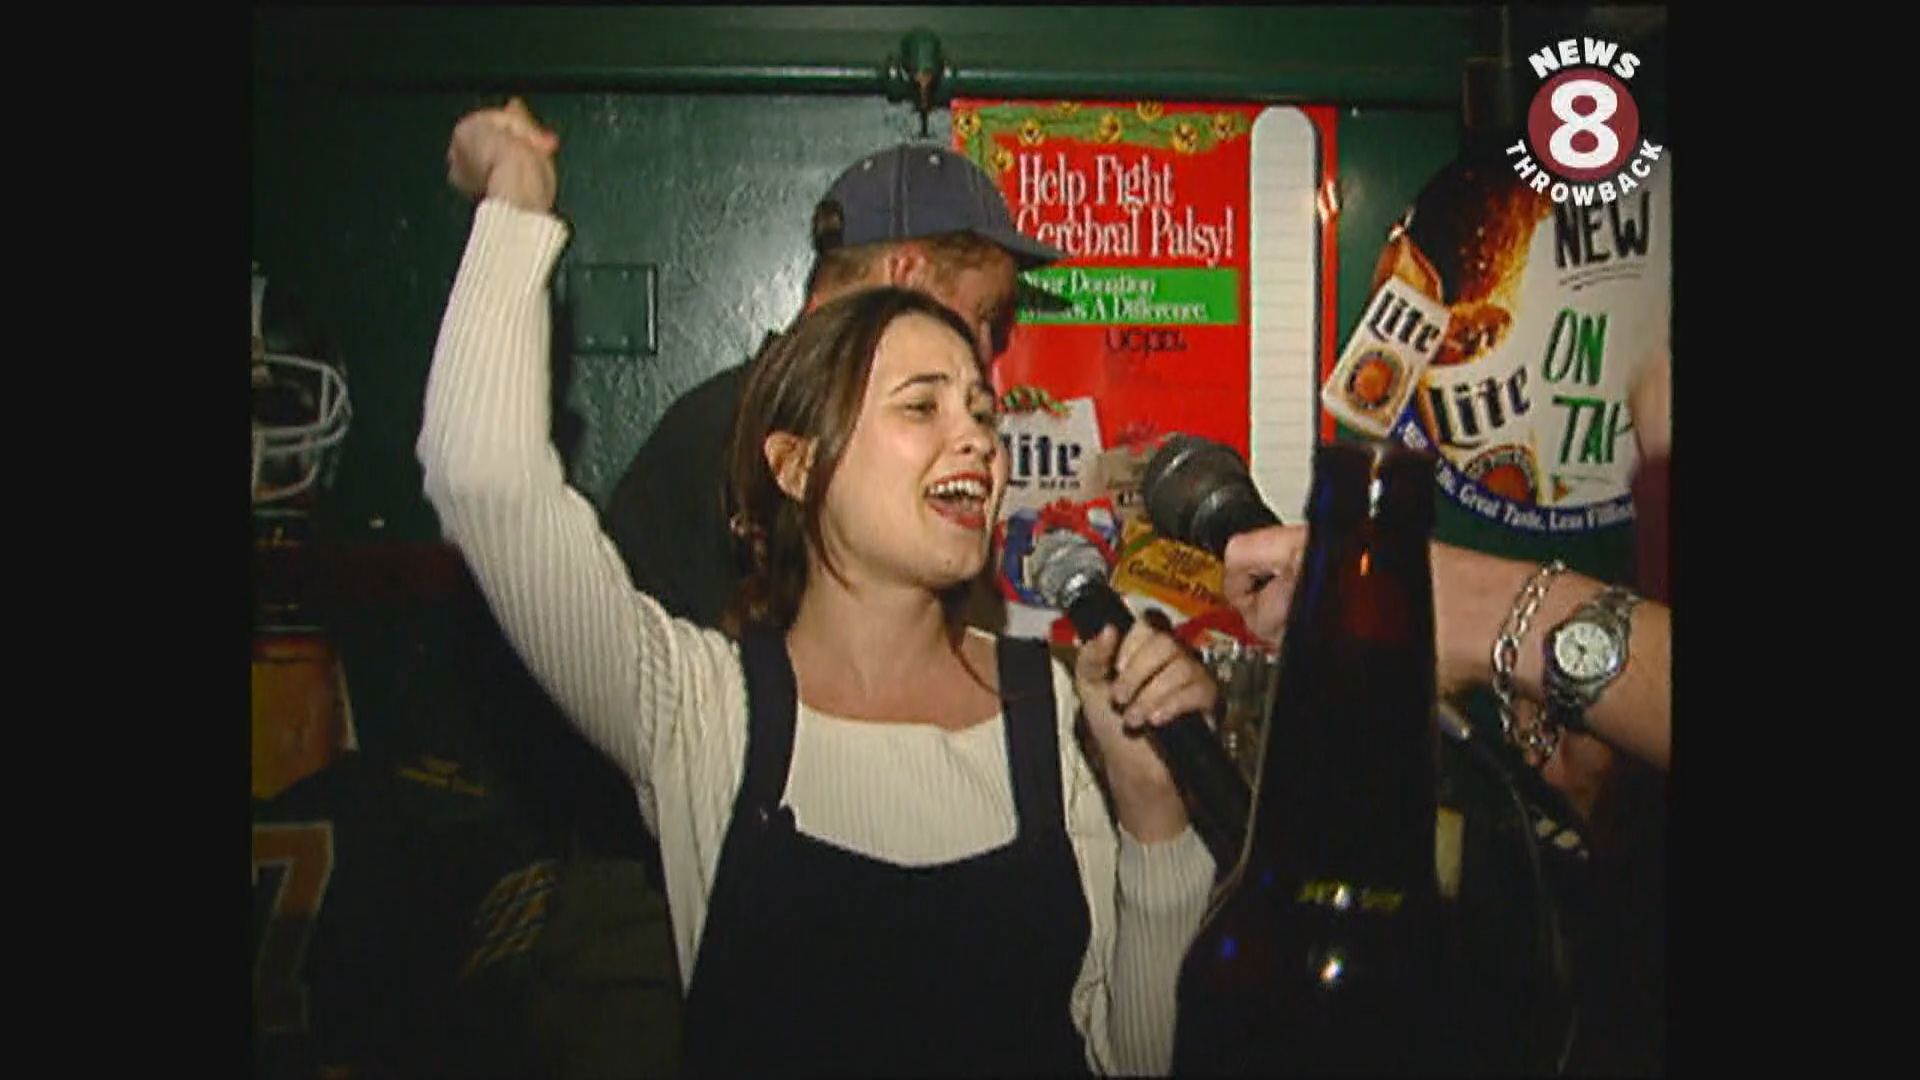 11/25/94 It's nothing new but its popularity sure is rising. News 8's Robin Mangarin is in Del Mar at JJ Maguire's where patrons are enjoying the karaoke machine.